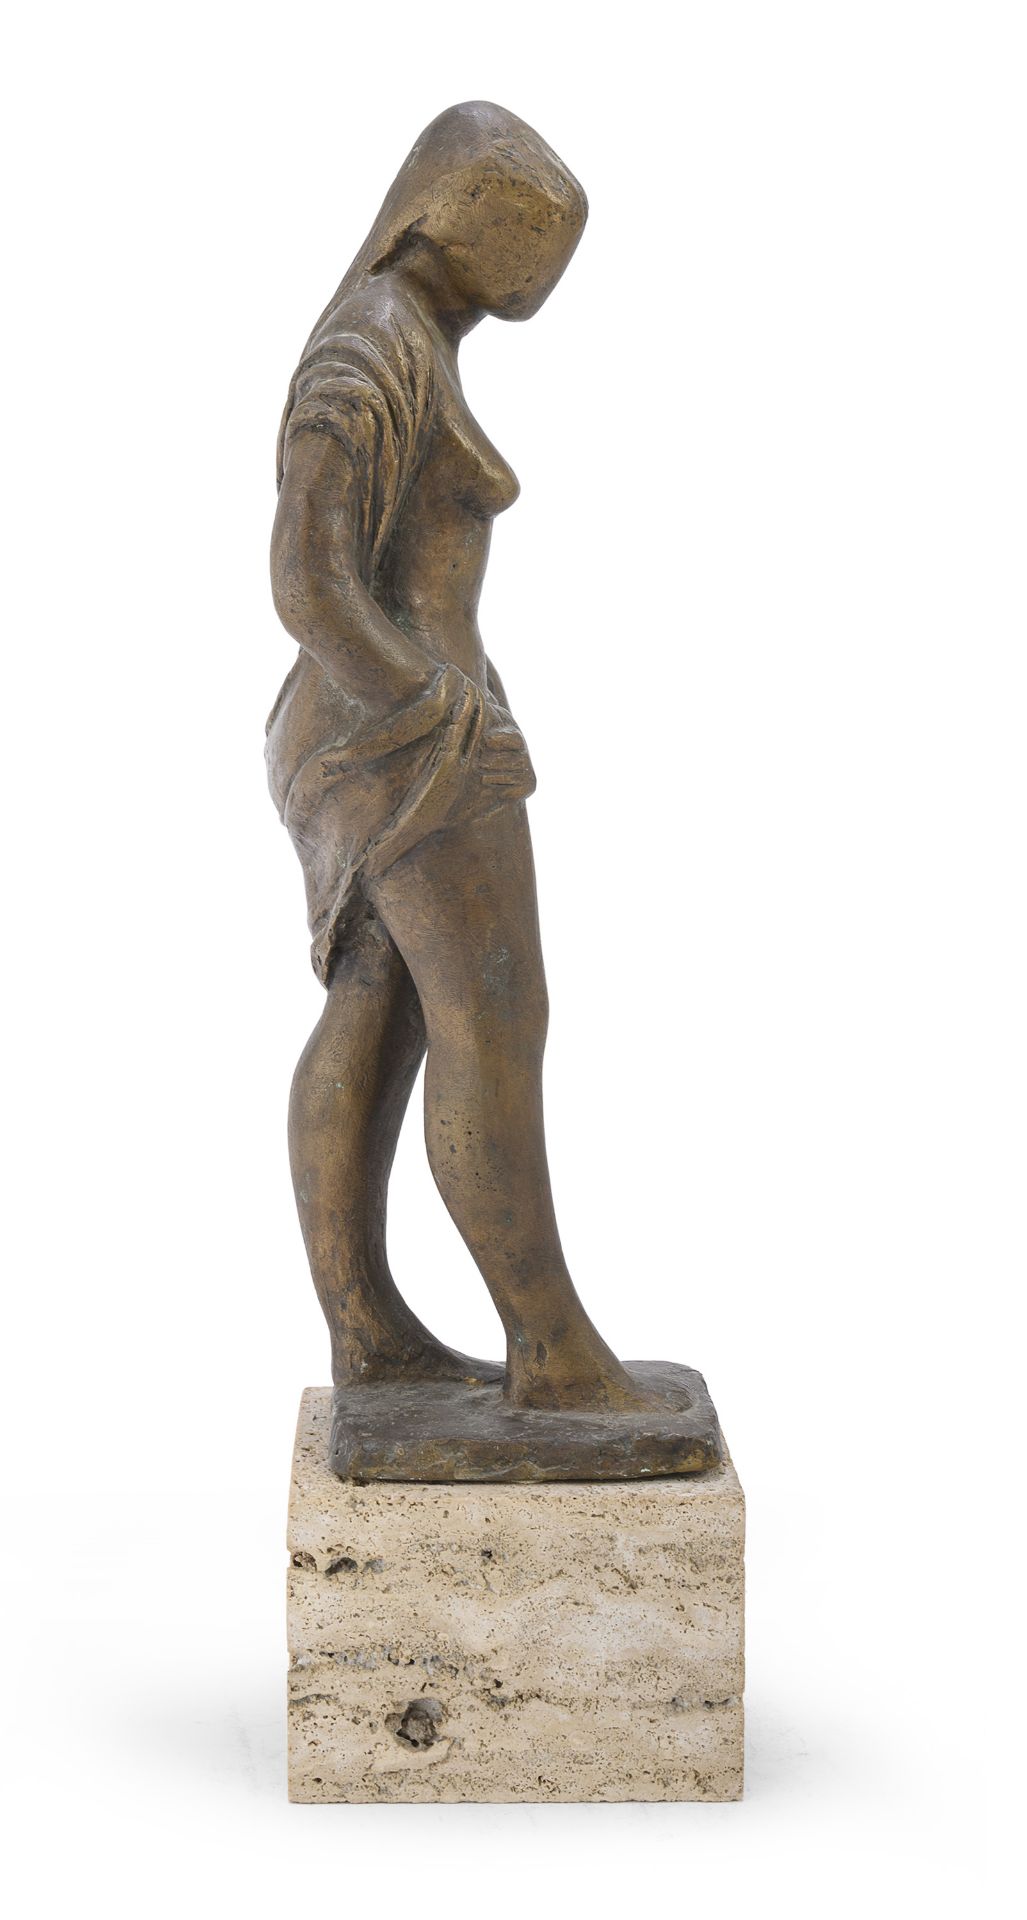 BRONZE SCULPTURE OF A WOMAN SIGNED COSIMINI 20TH CENTURY - Image 2 of 2